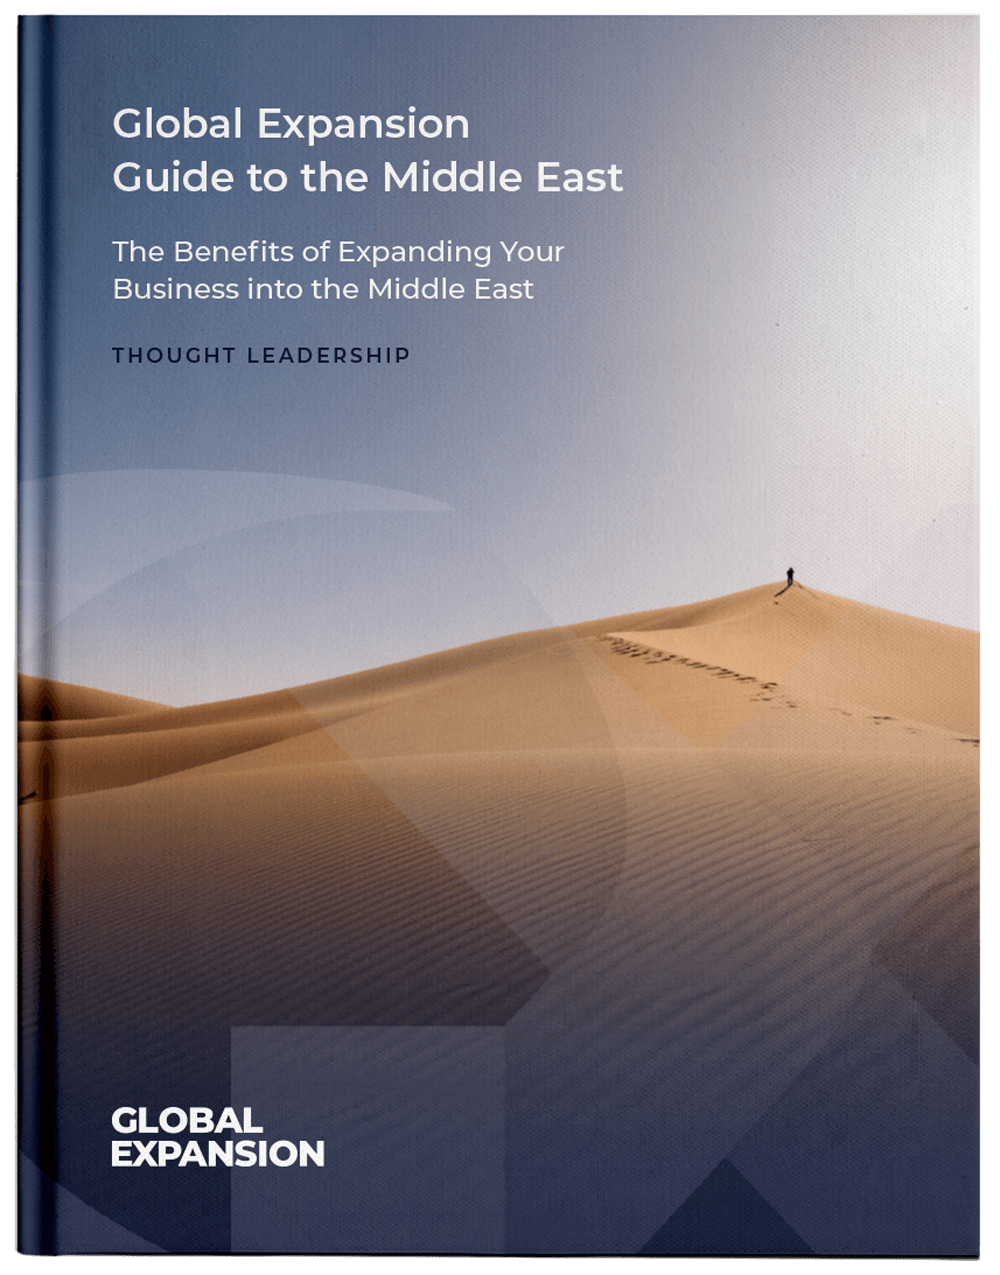 GX_Global-Expansion-Guide-to-the-Middle-East-Cover